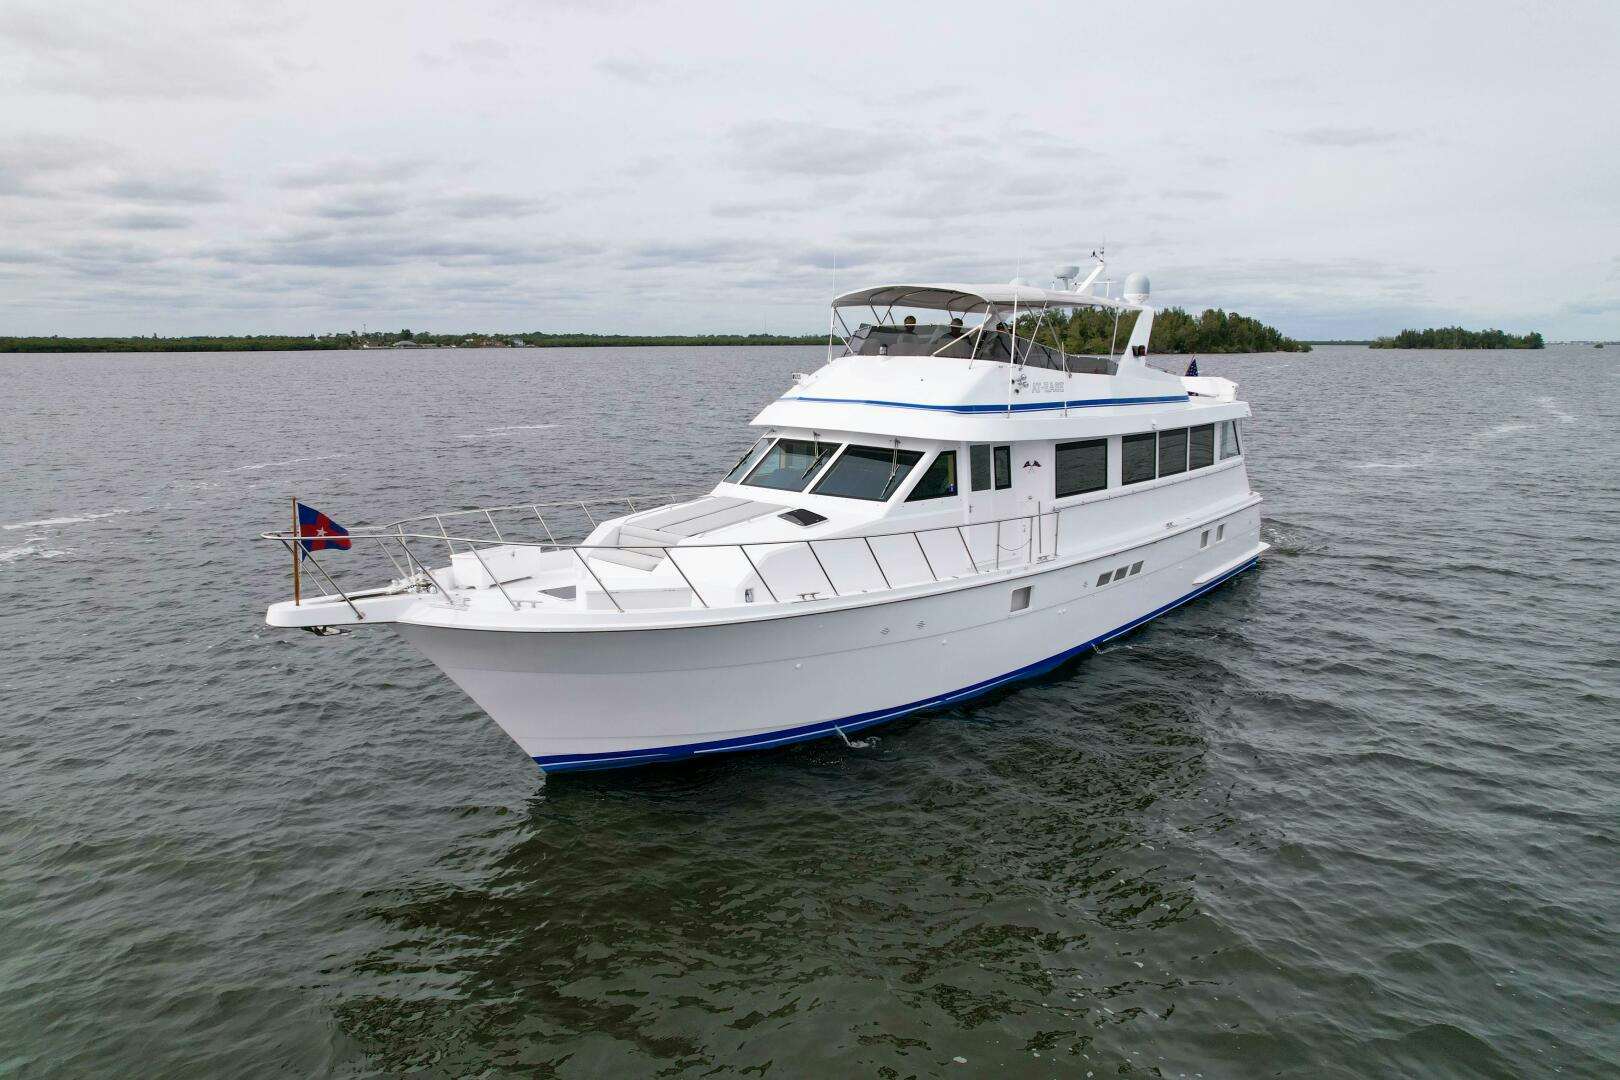 At ease
Yacht for Sale